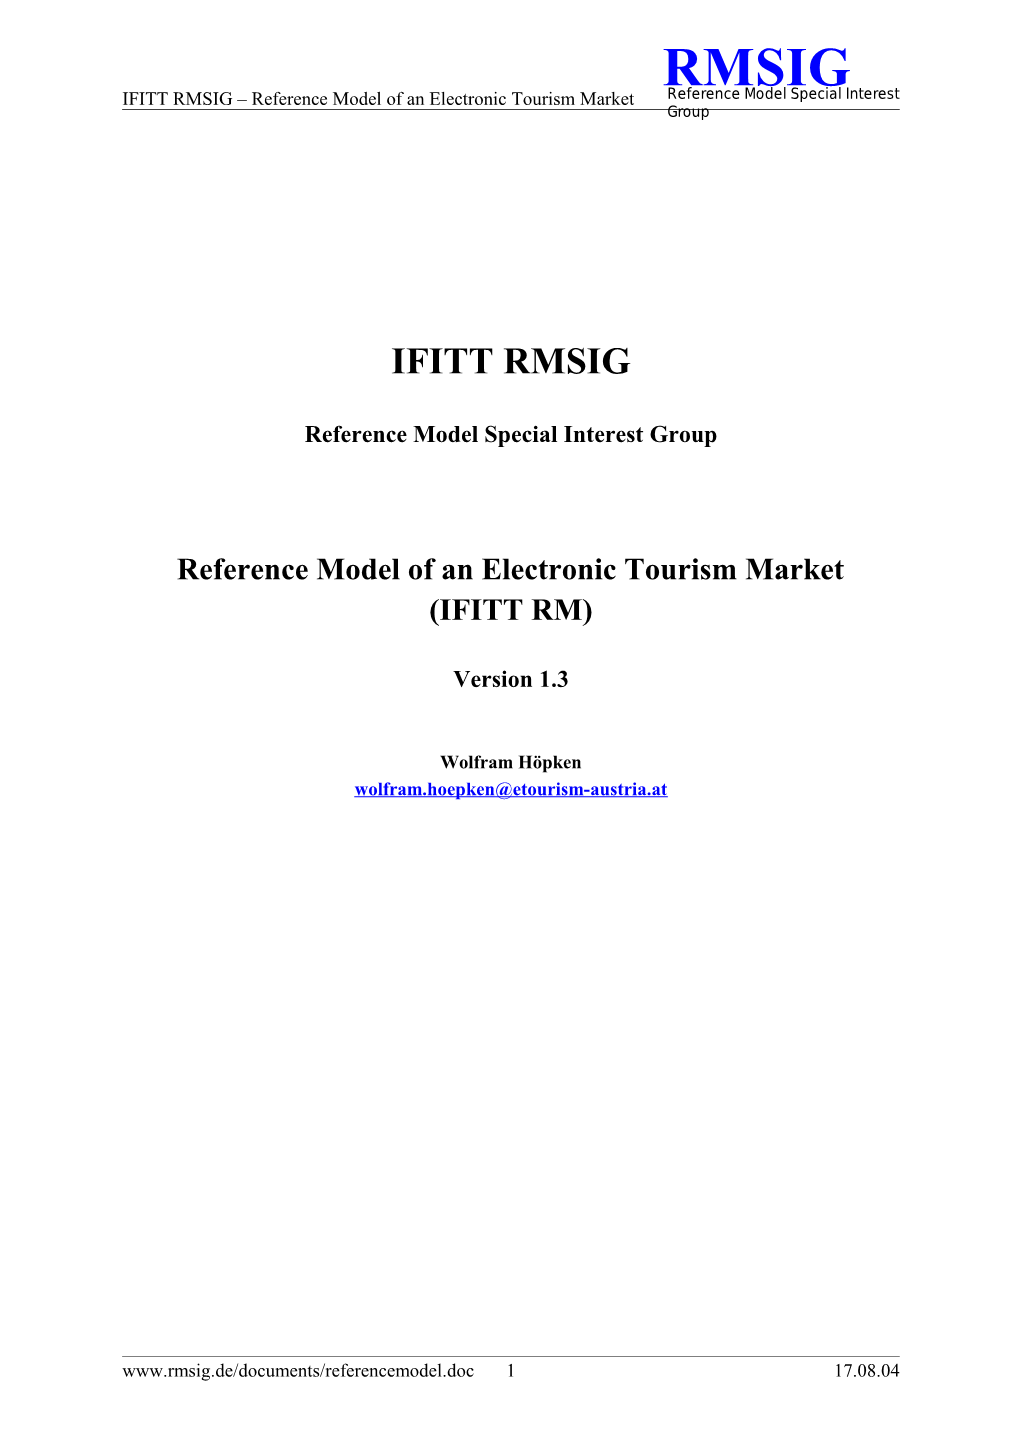 Modelling of an Electronic Tourism Market